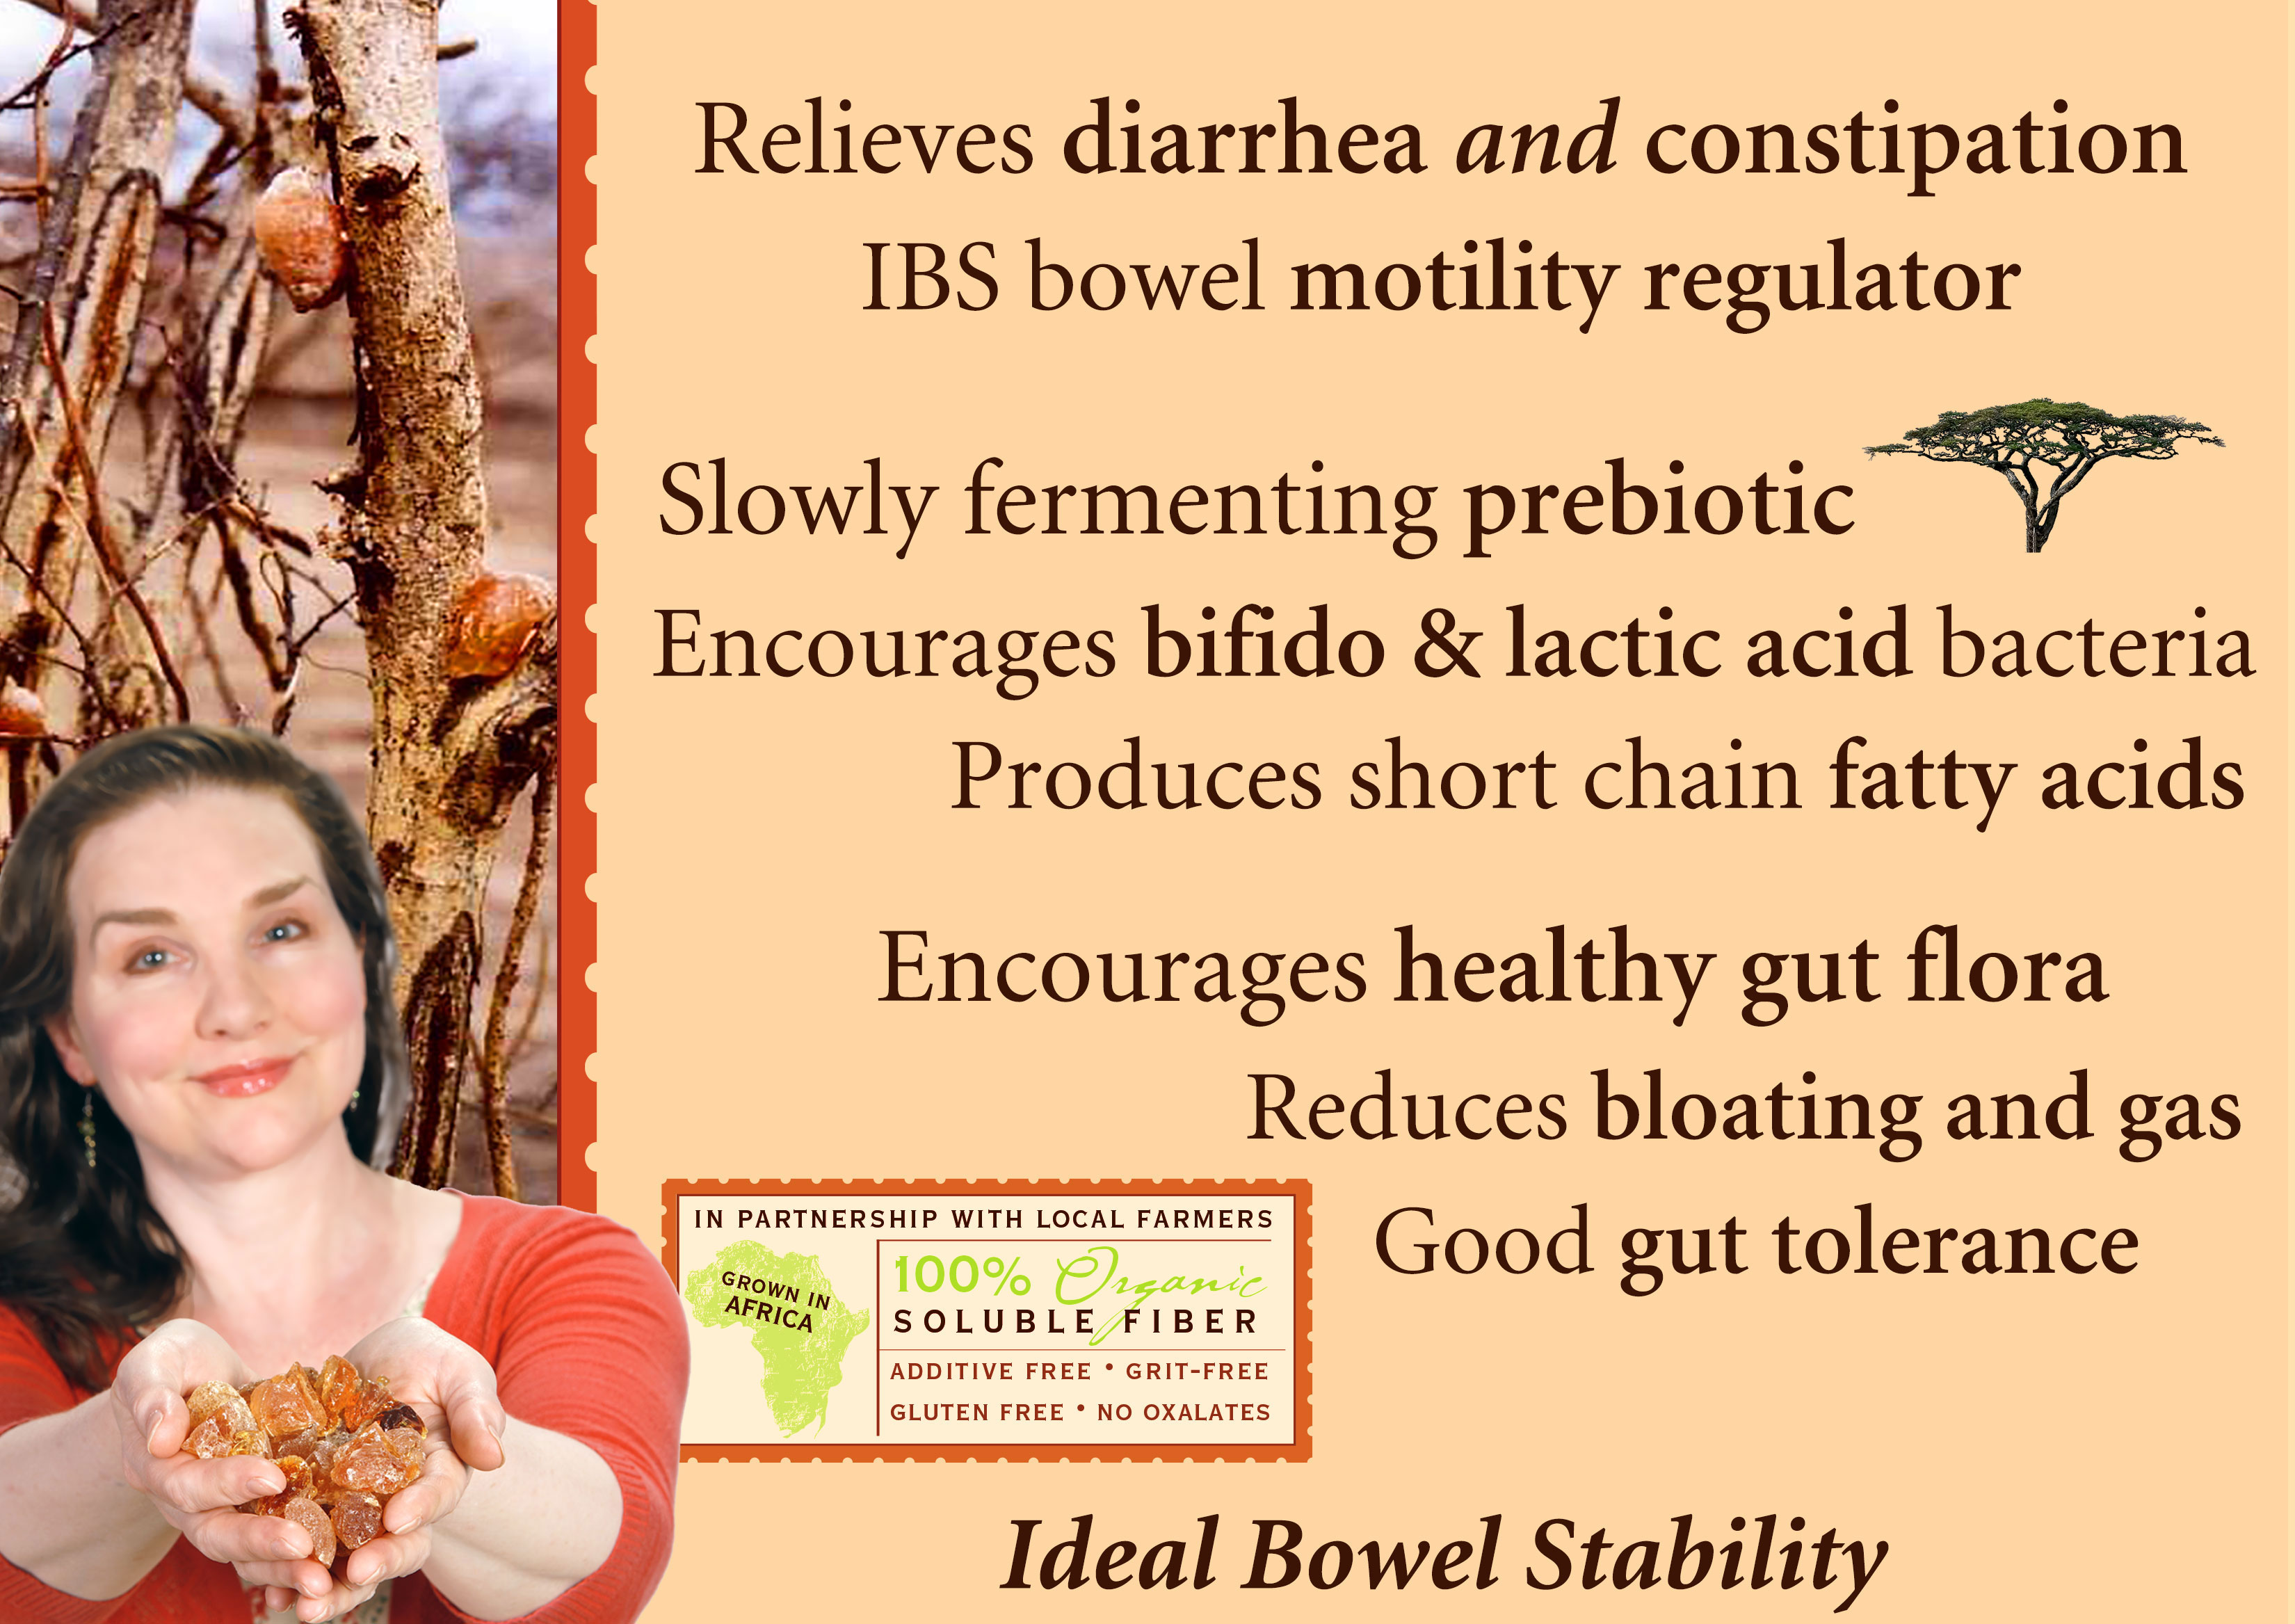 Diet Starter Kit - Eating for IBS, First Year IBS, Tummy Fiber Acacia CAN